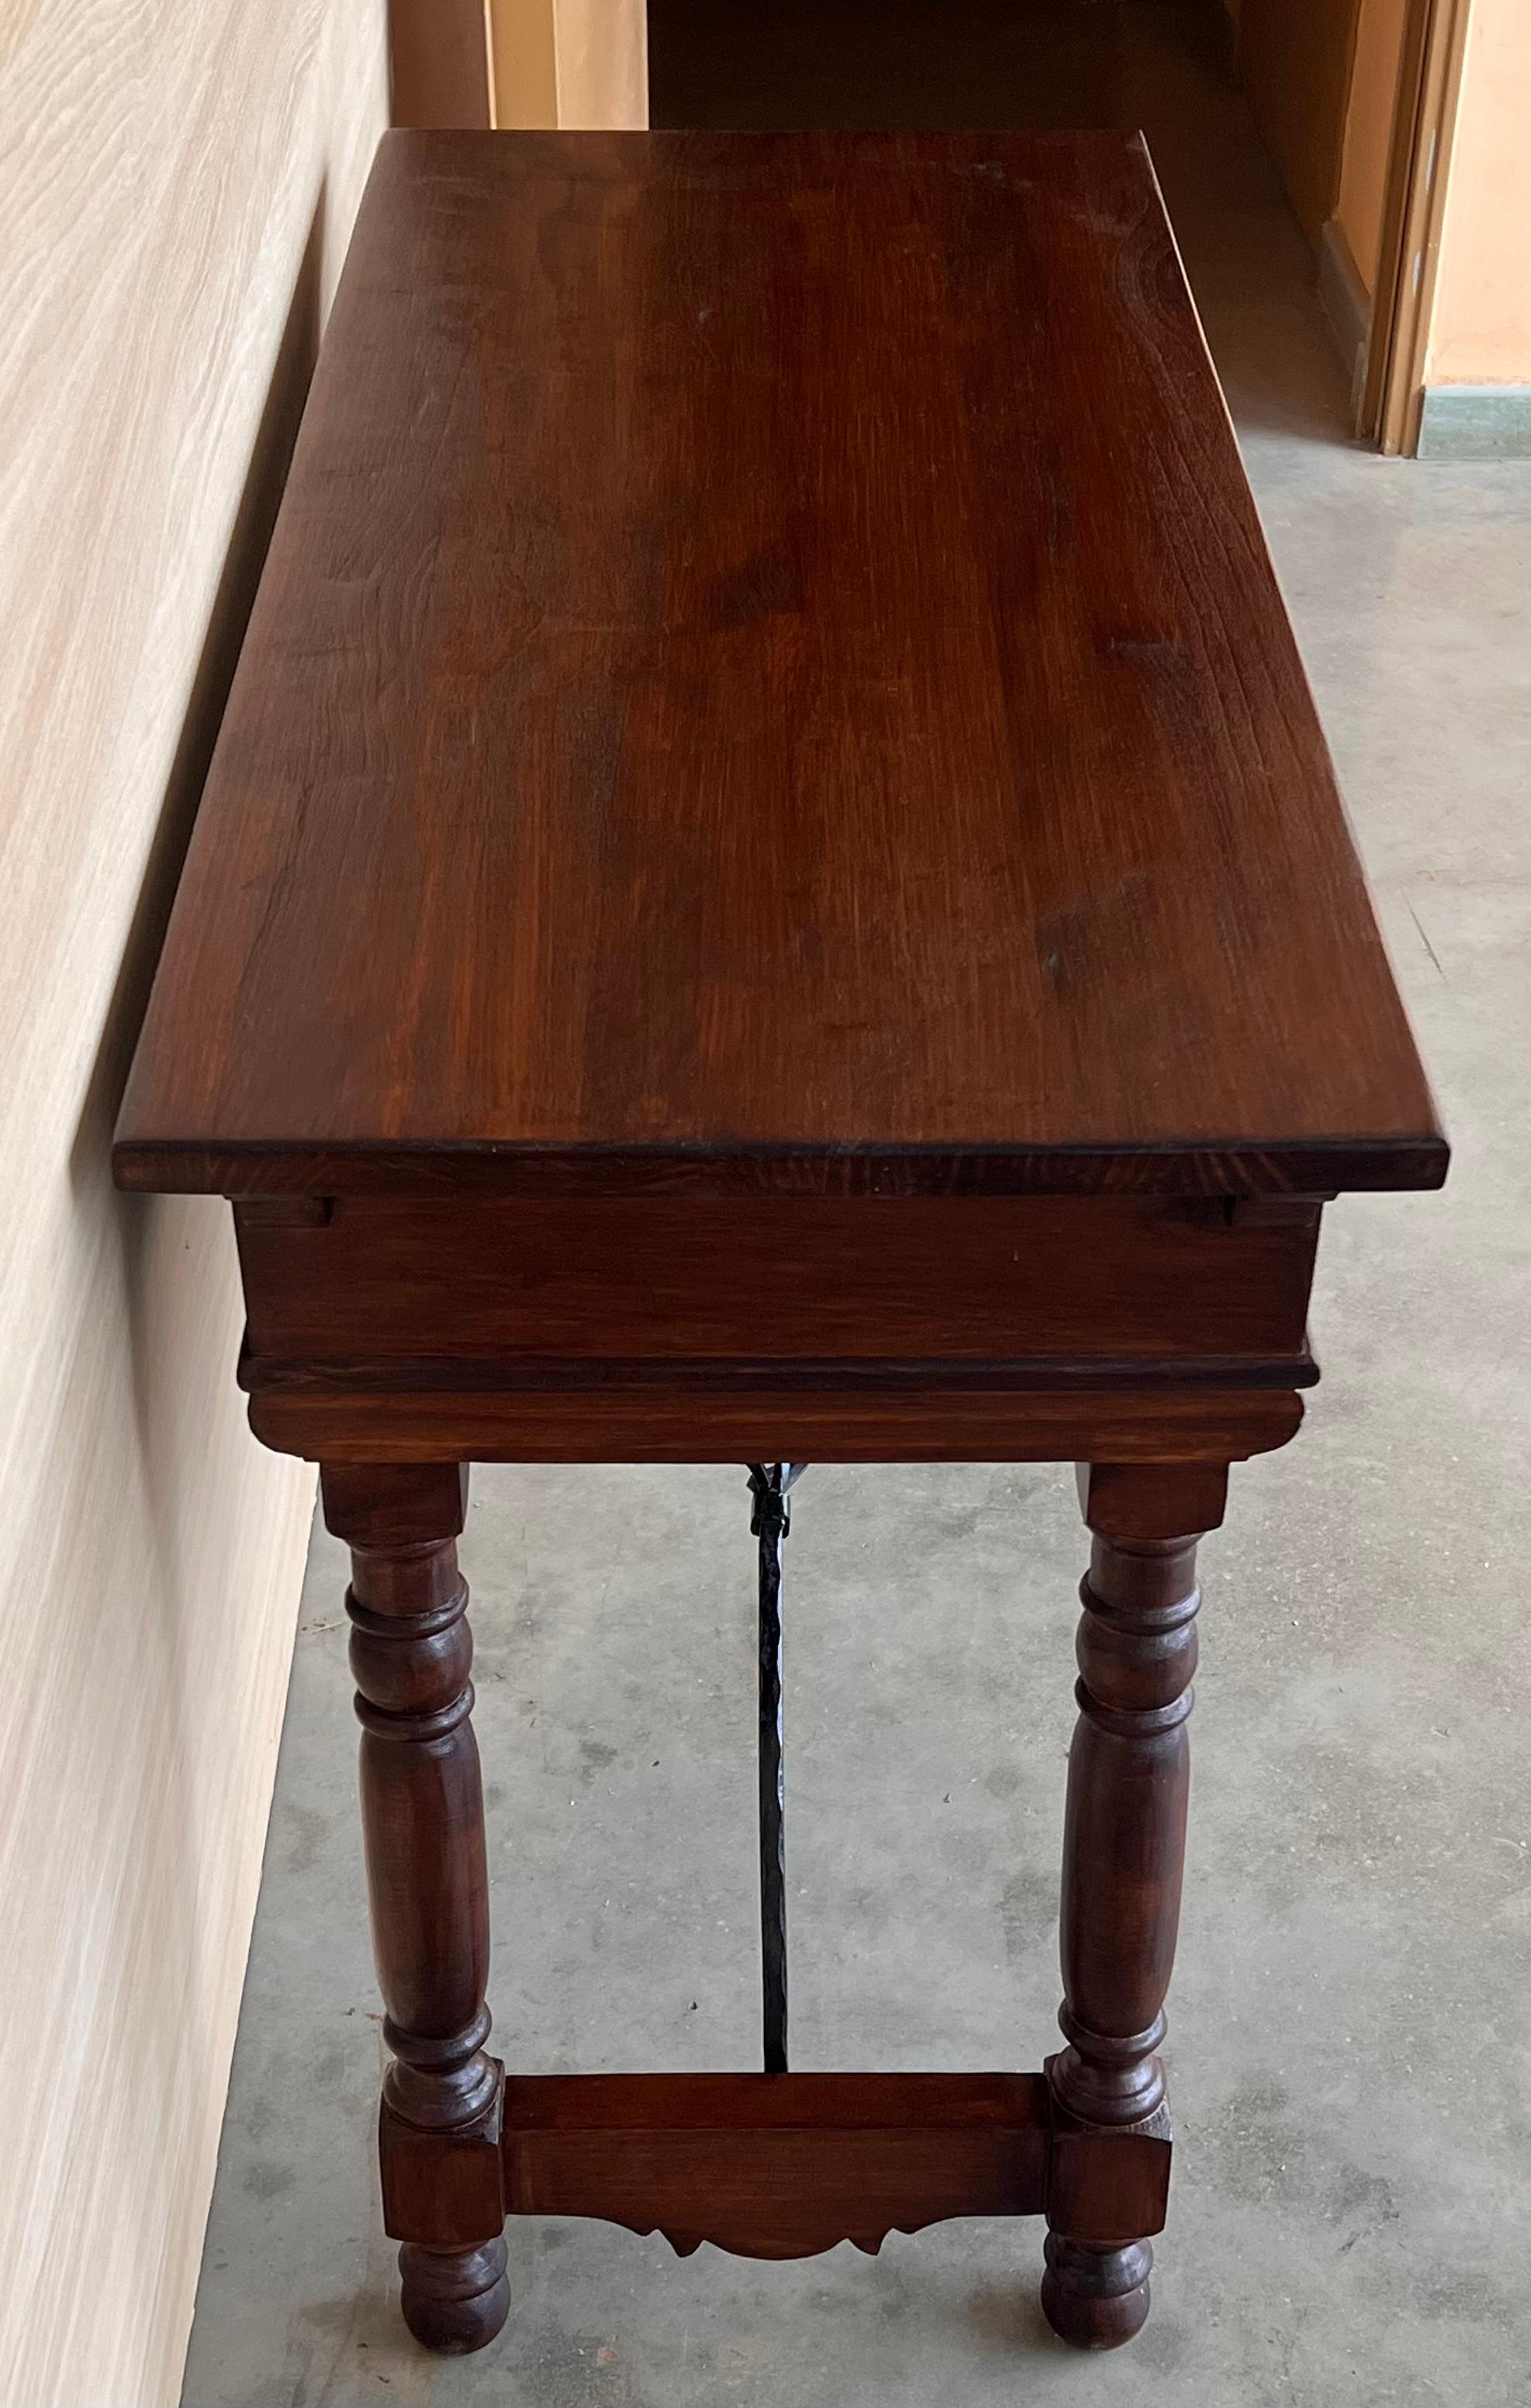 20th Century Solid Walnut Baroque Lyre-Leg Trestle Refectory Desk Writing Table For Sale 11